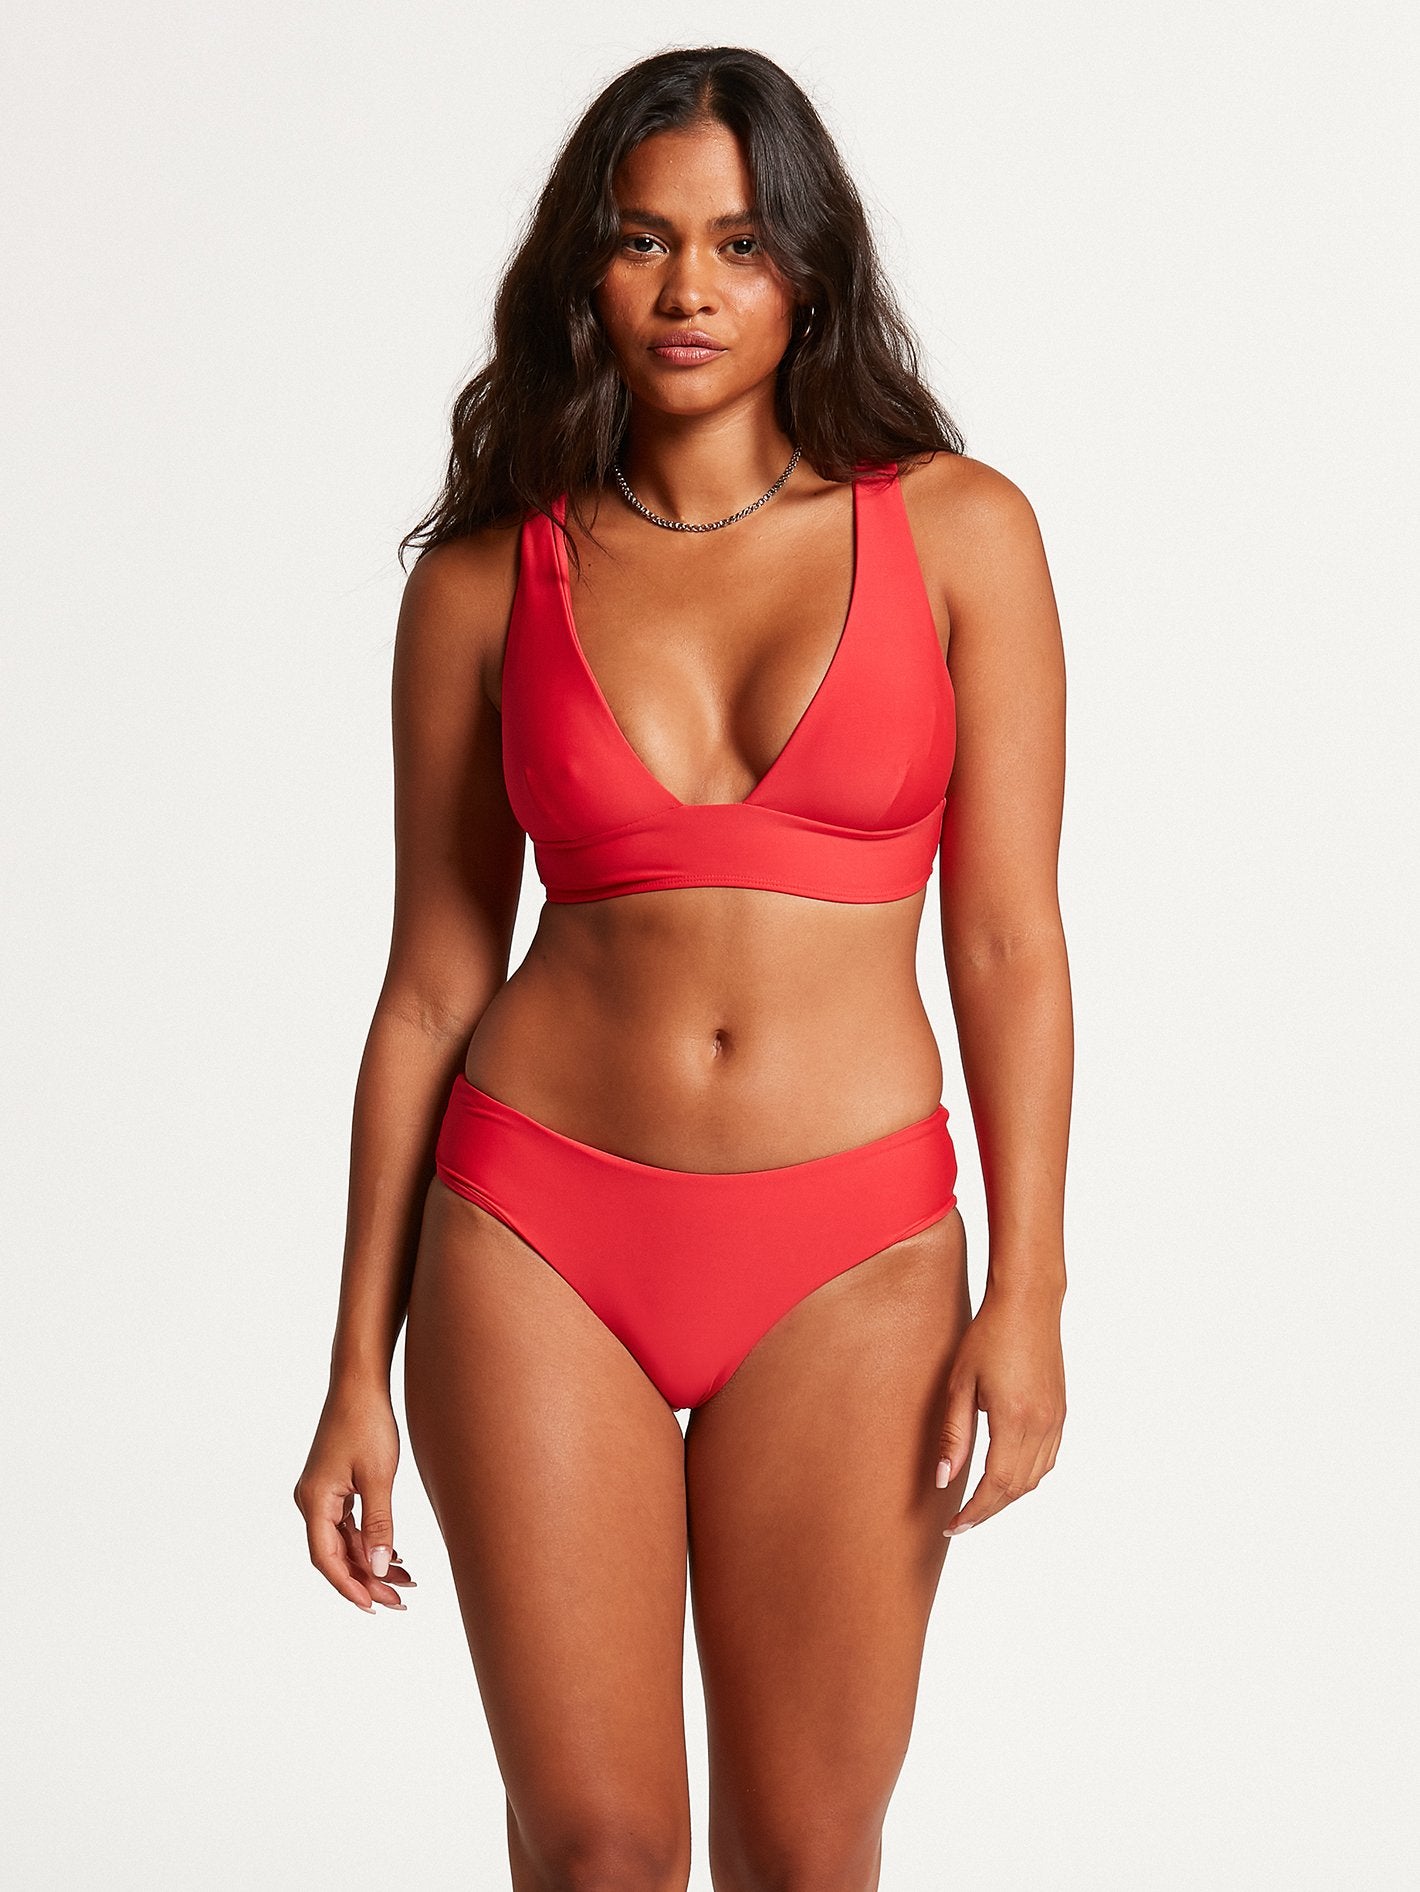 Fantasie Versailles Deep Gathered Control Swim Bottom in Red FINAL SALE  NORMALLY $56.99 - Busted Bra Shop